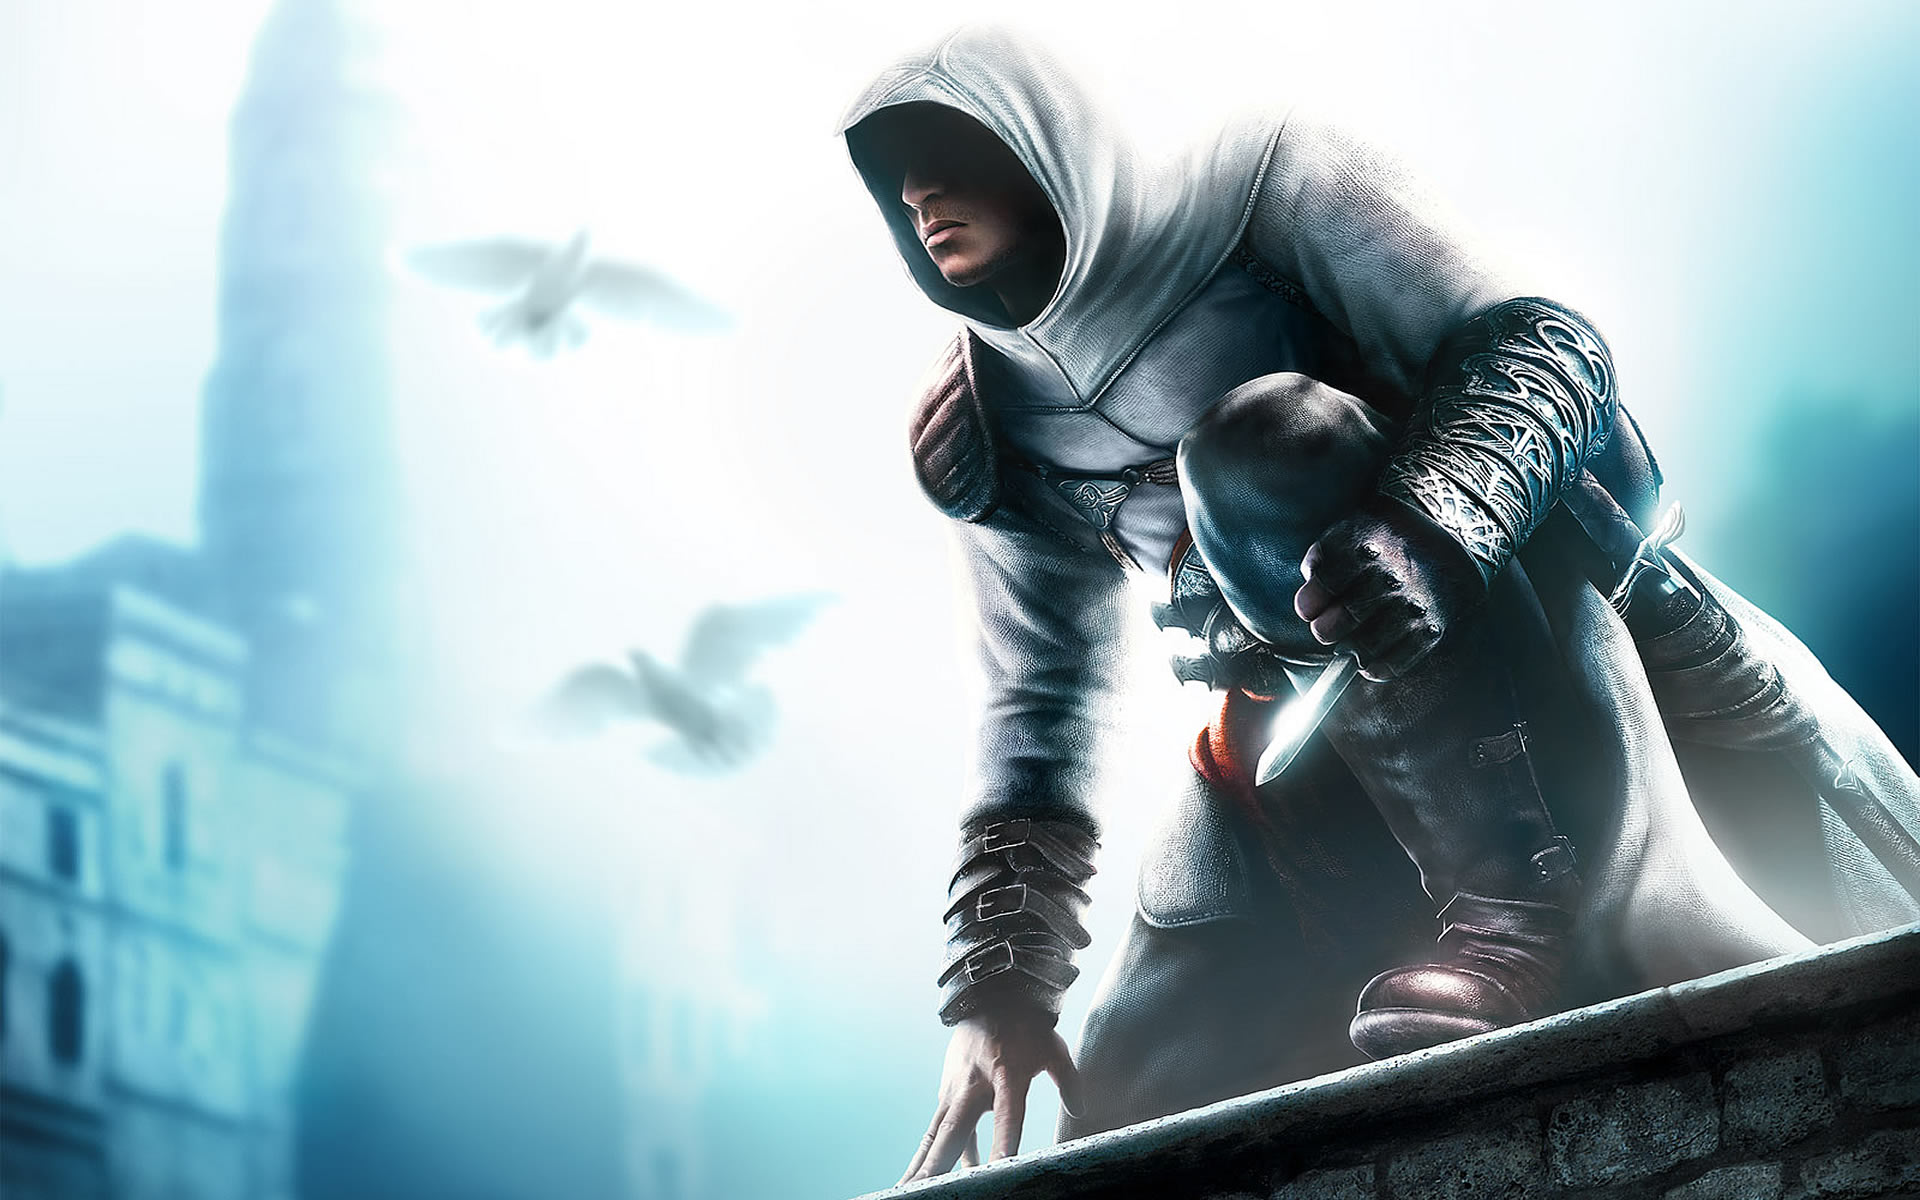 Altair Crouching On Wall Action Games Wallpaper Image Featuring